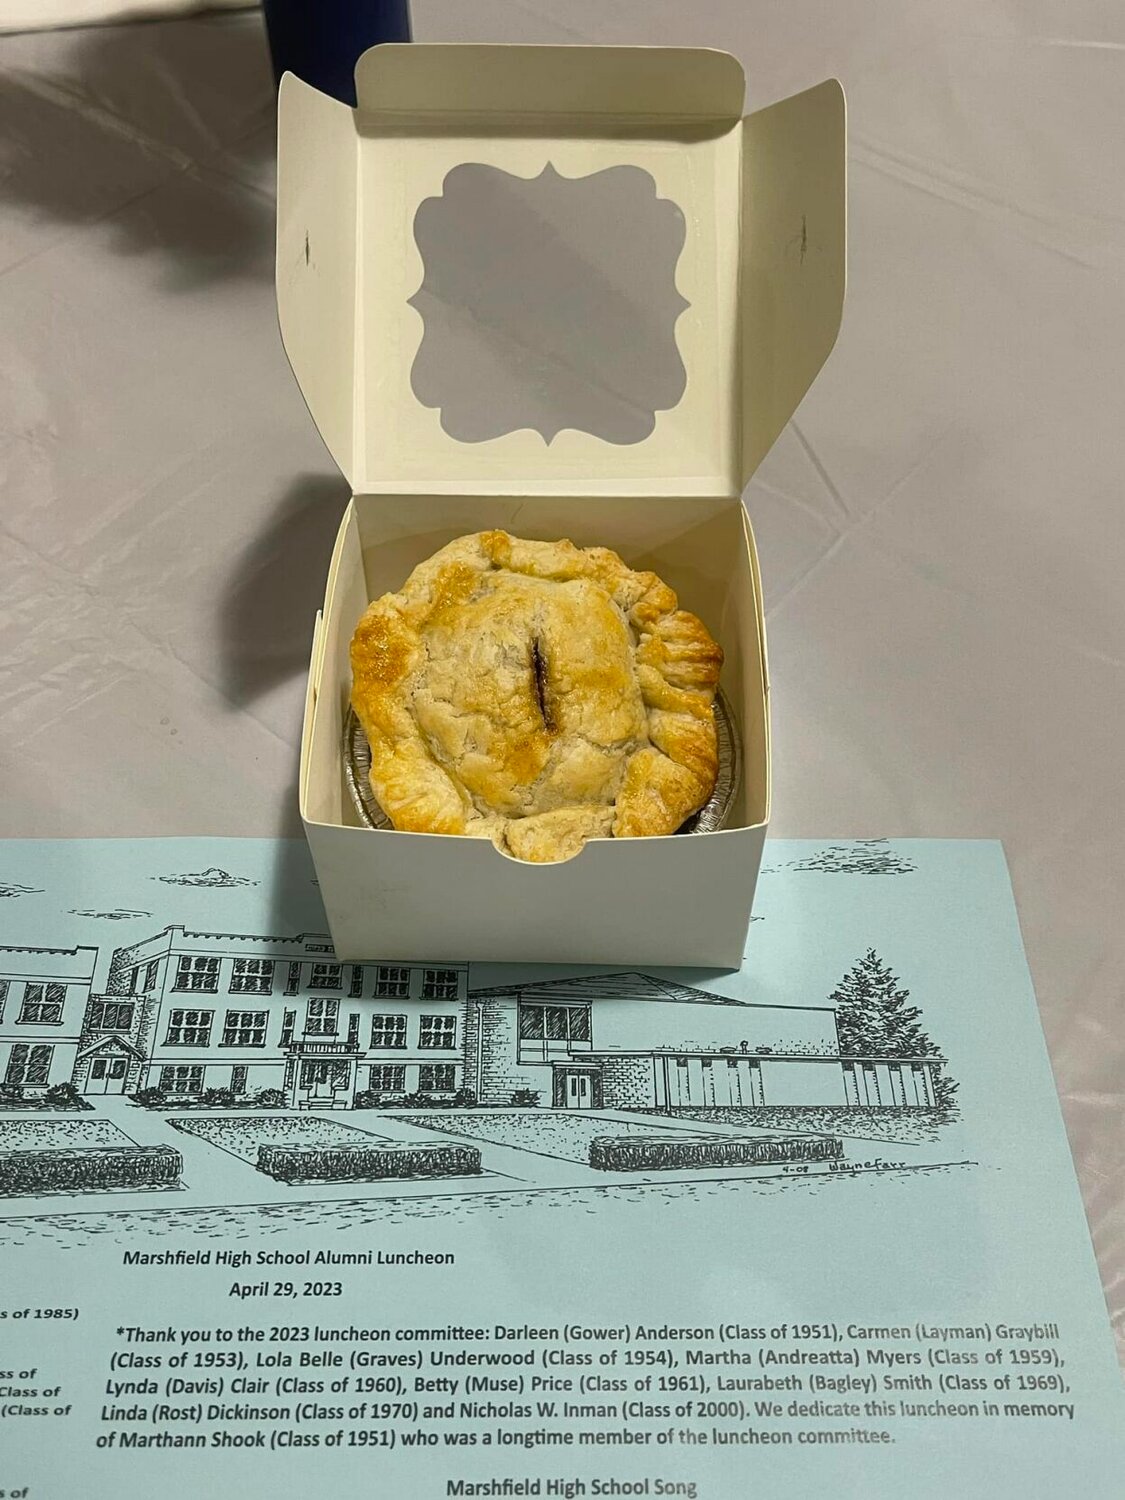 Pies made with the Garbage Can Cafe's world-famous cherry pie recipe were served at this year's Marshfield School Alumni Luncheon at the Cherry Blossom Festival.